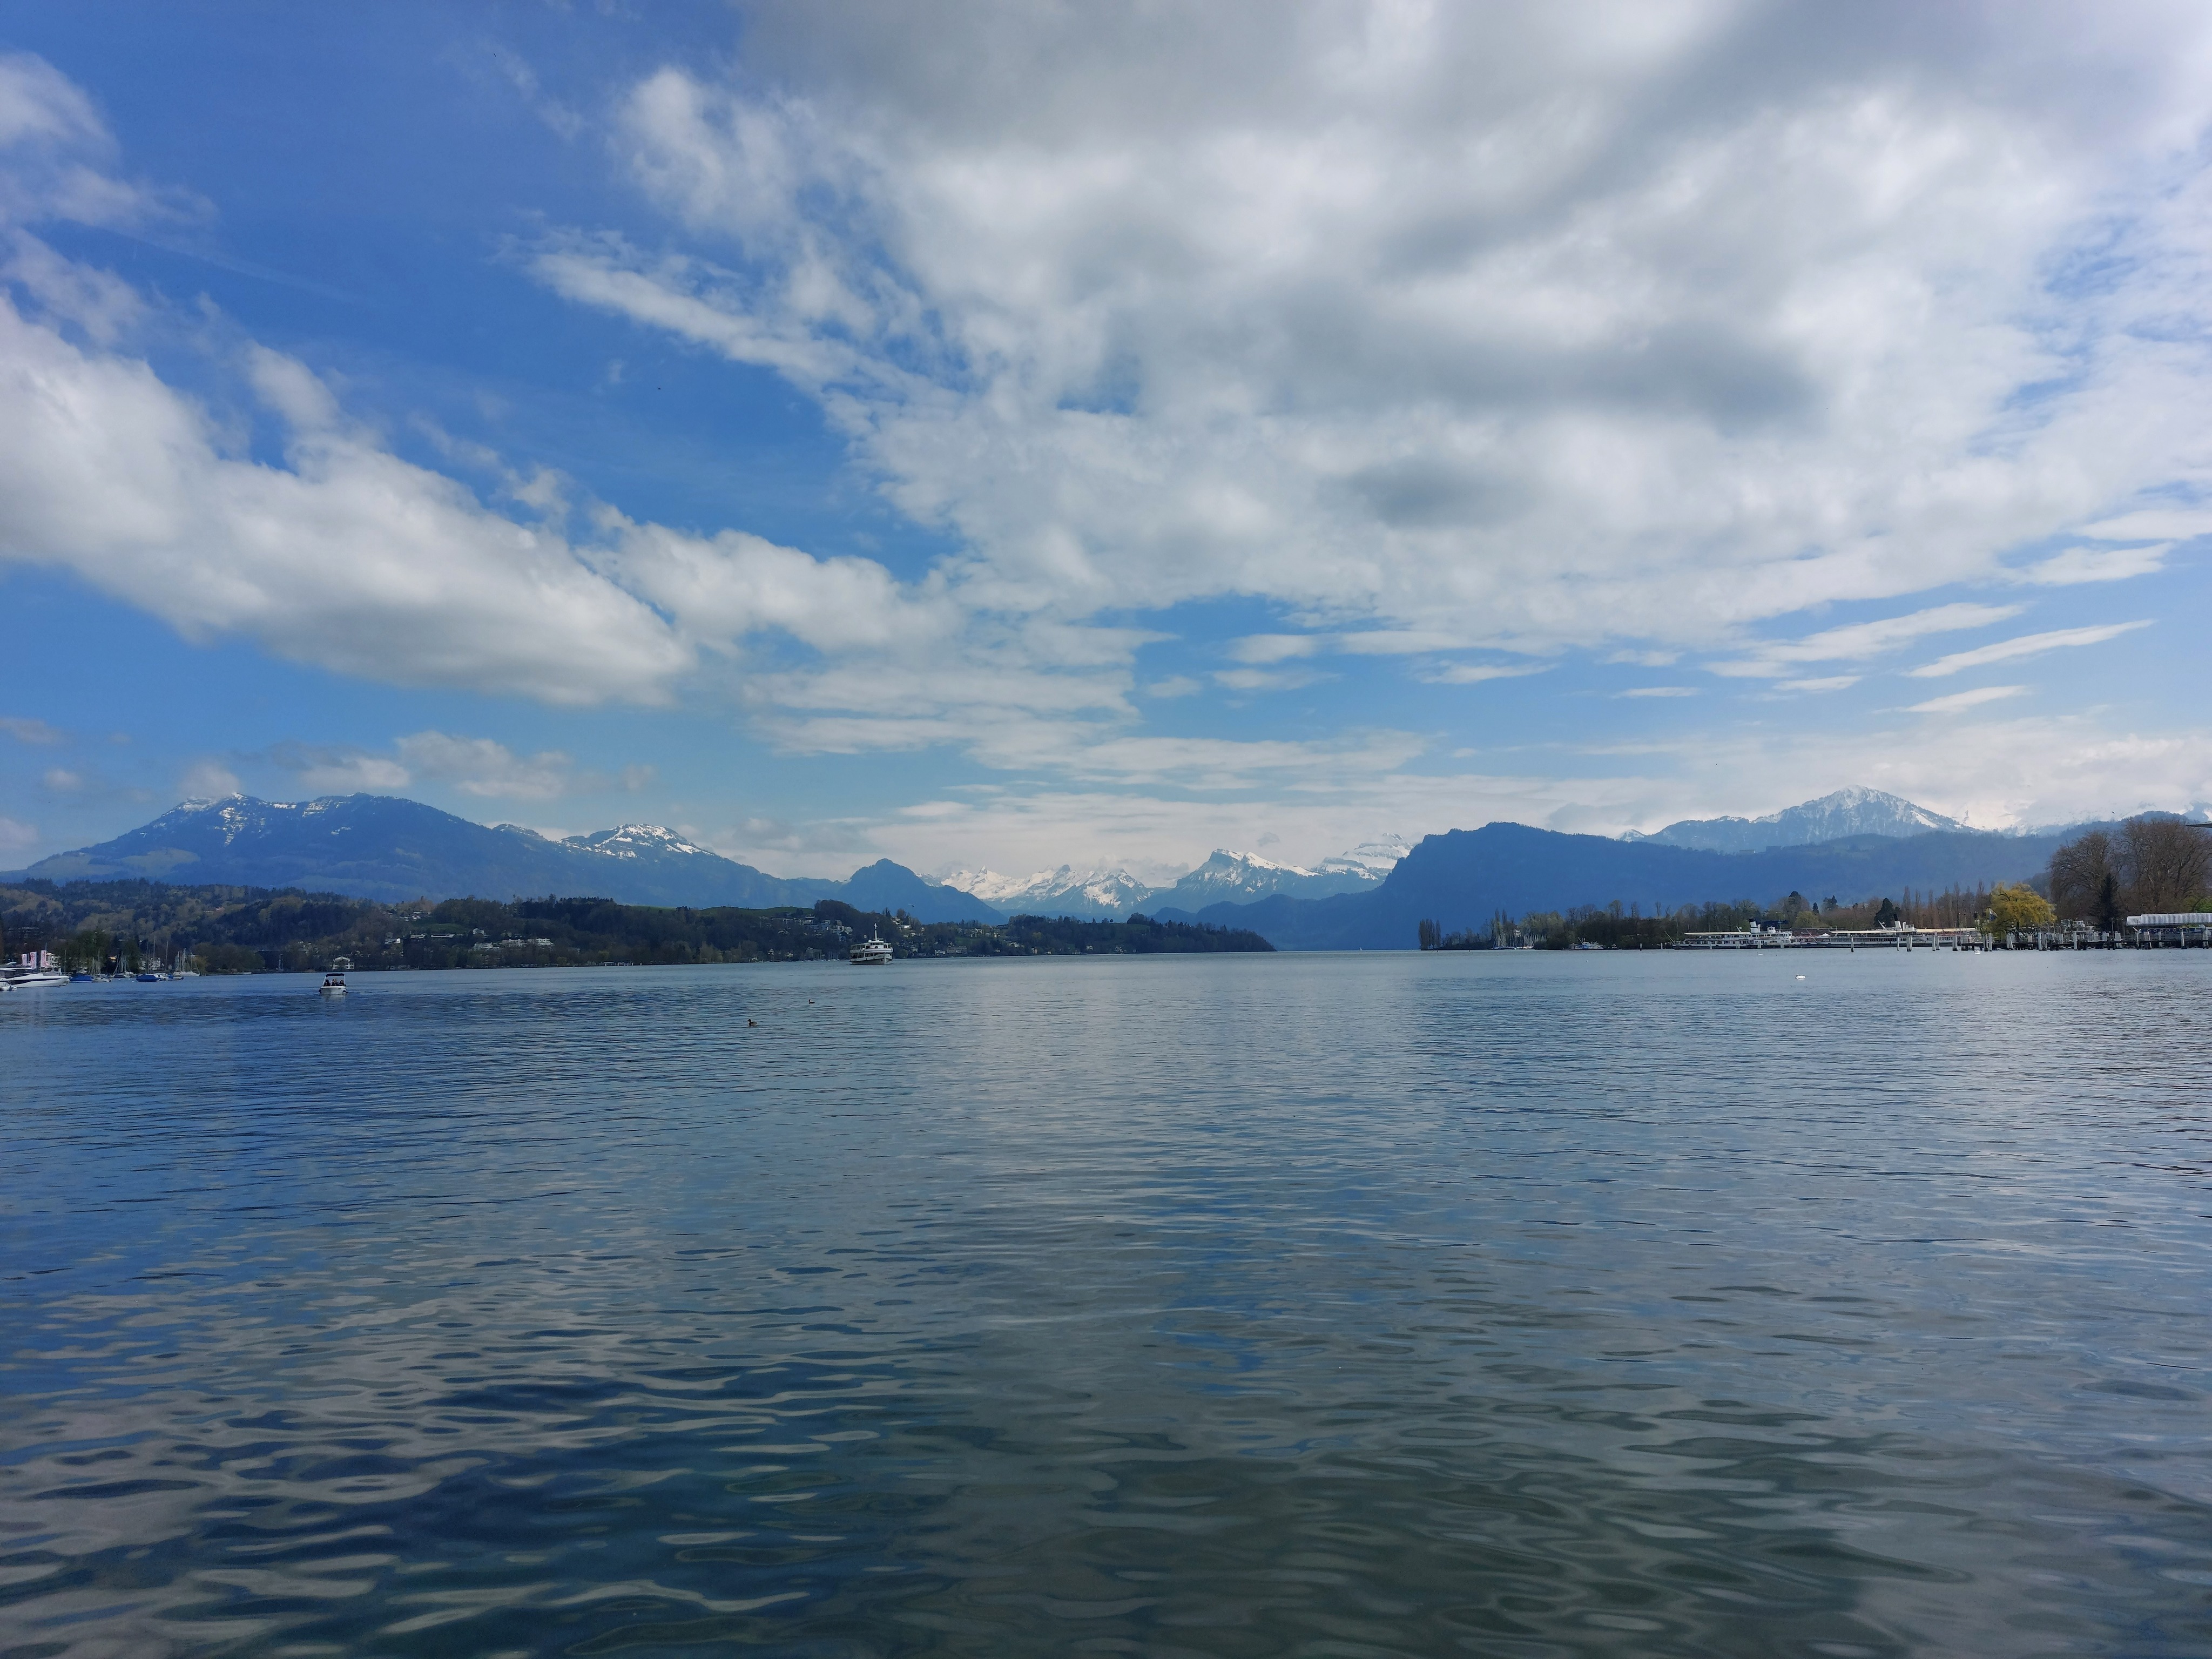 View from waterfront of Luzernersee